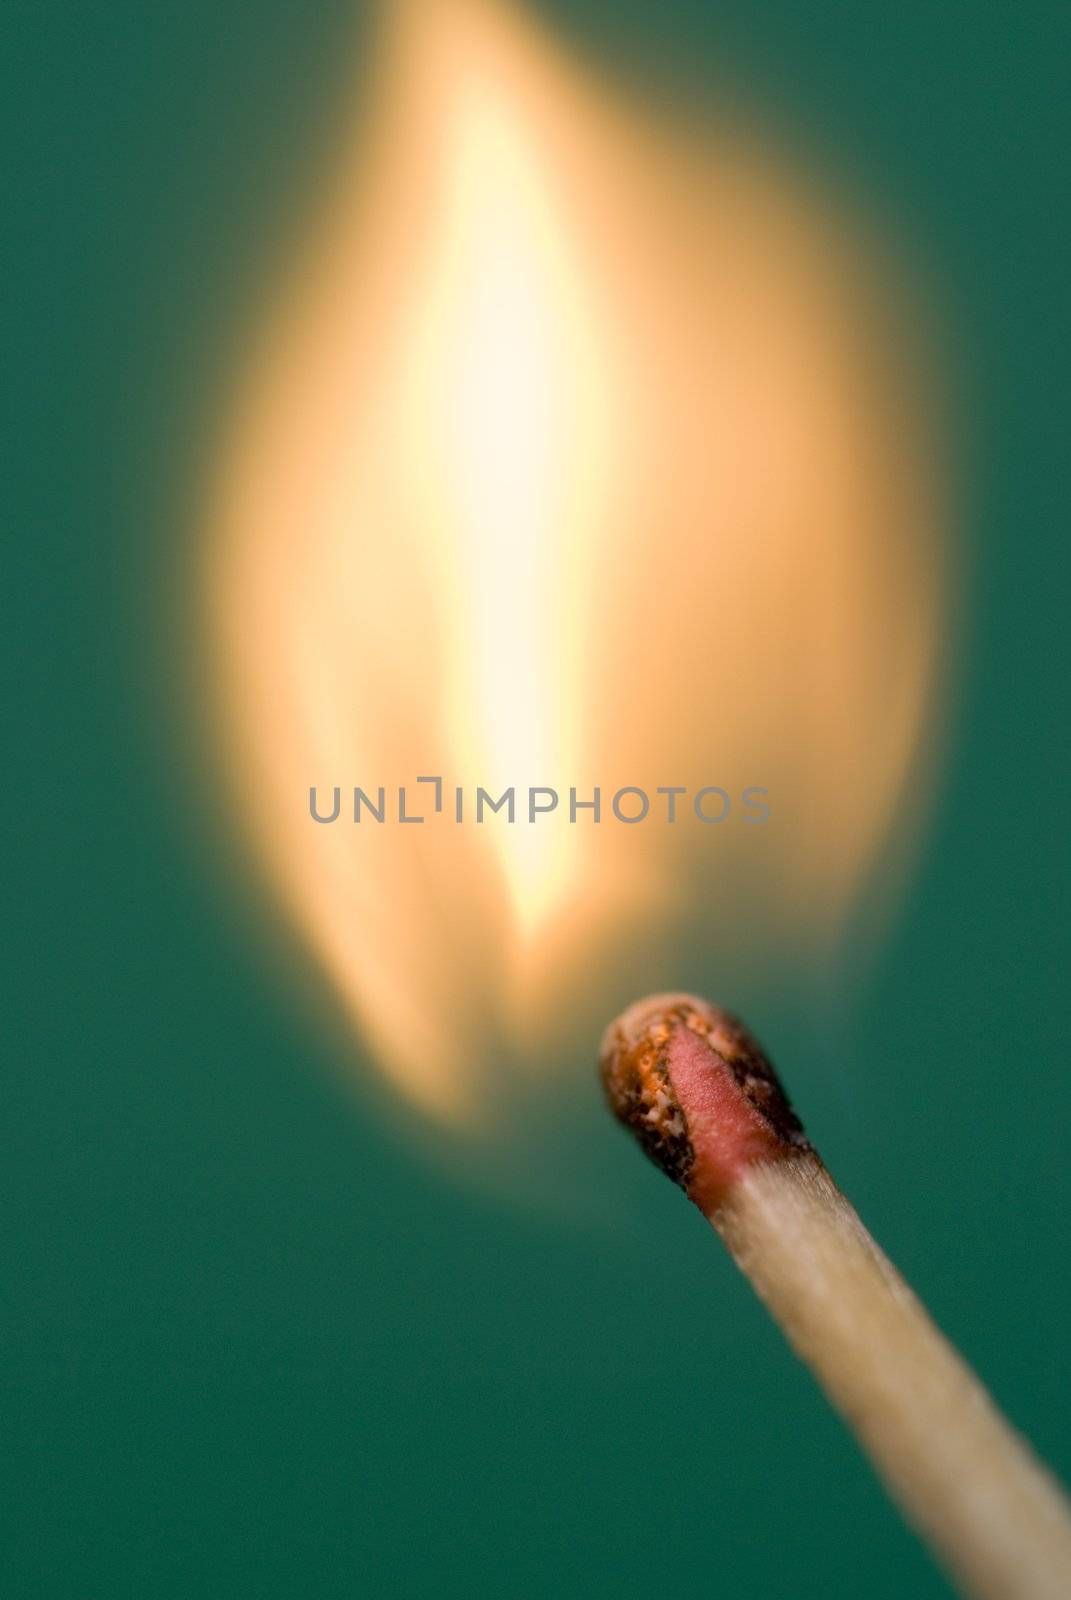 flames bursting from a matchhead just after lighting